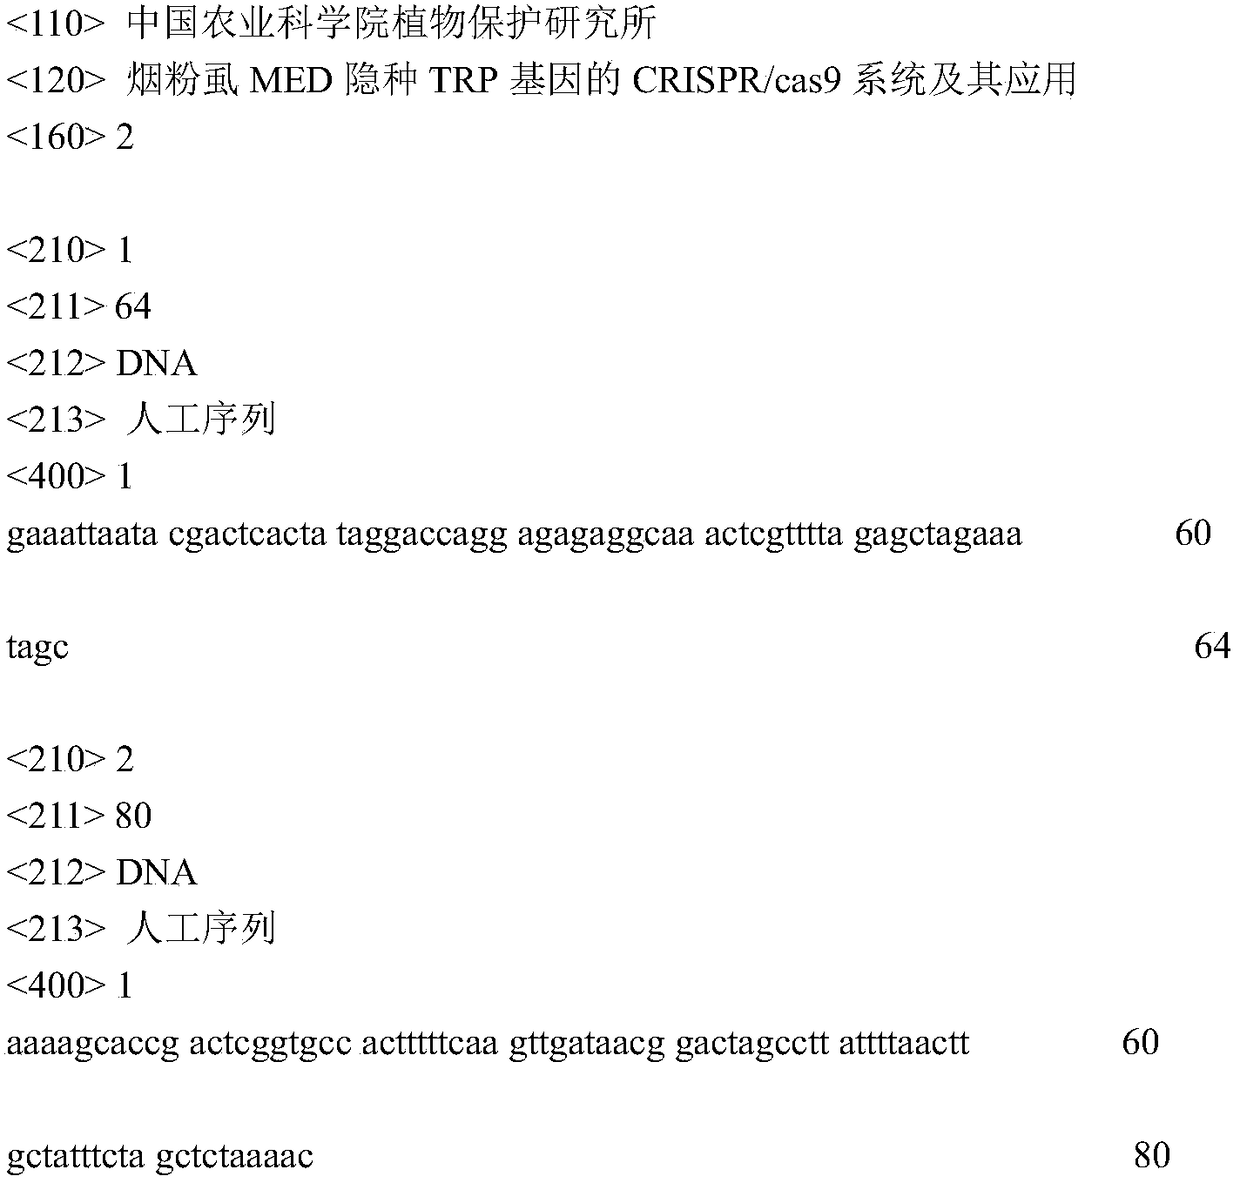 Crispr/cas9 system and its application of the trp gene of Bemisia tabaci med cryptic species